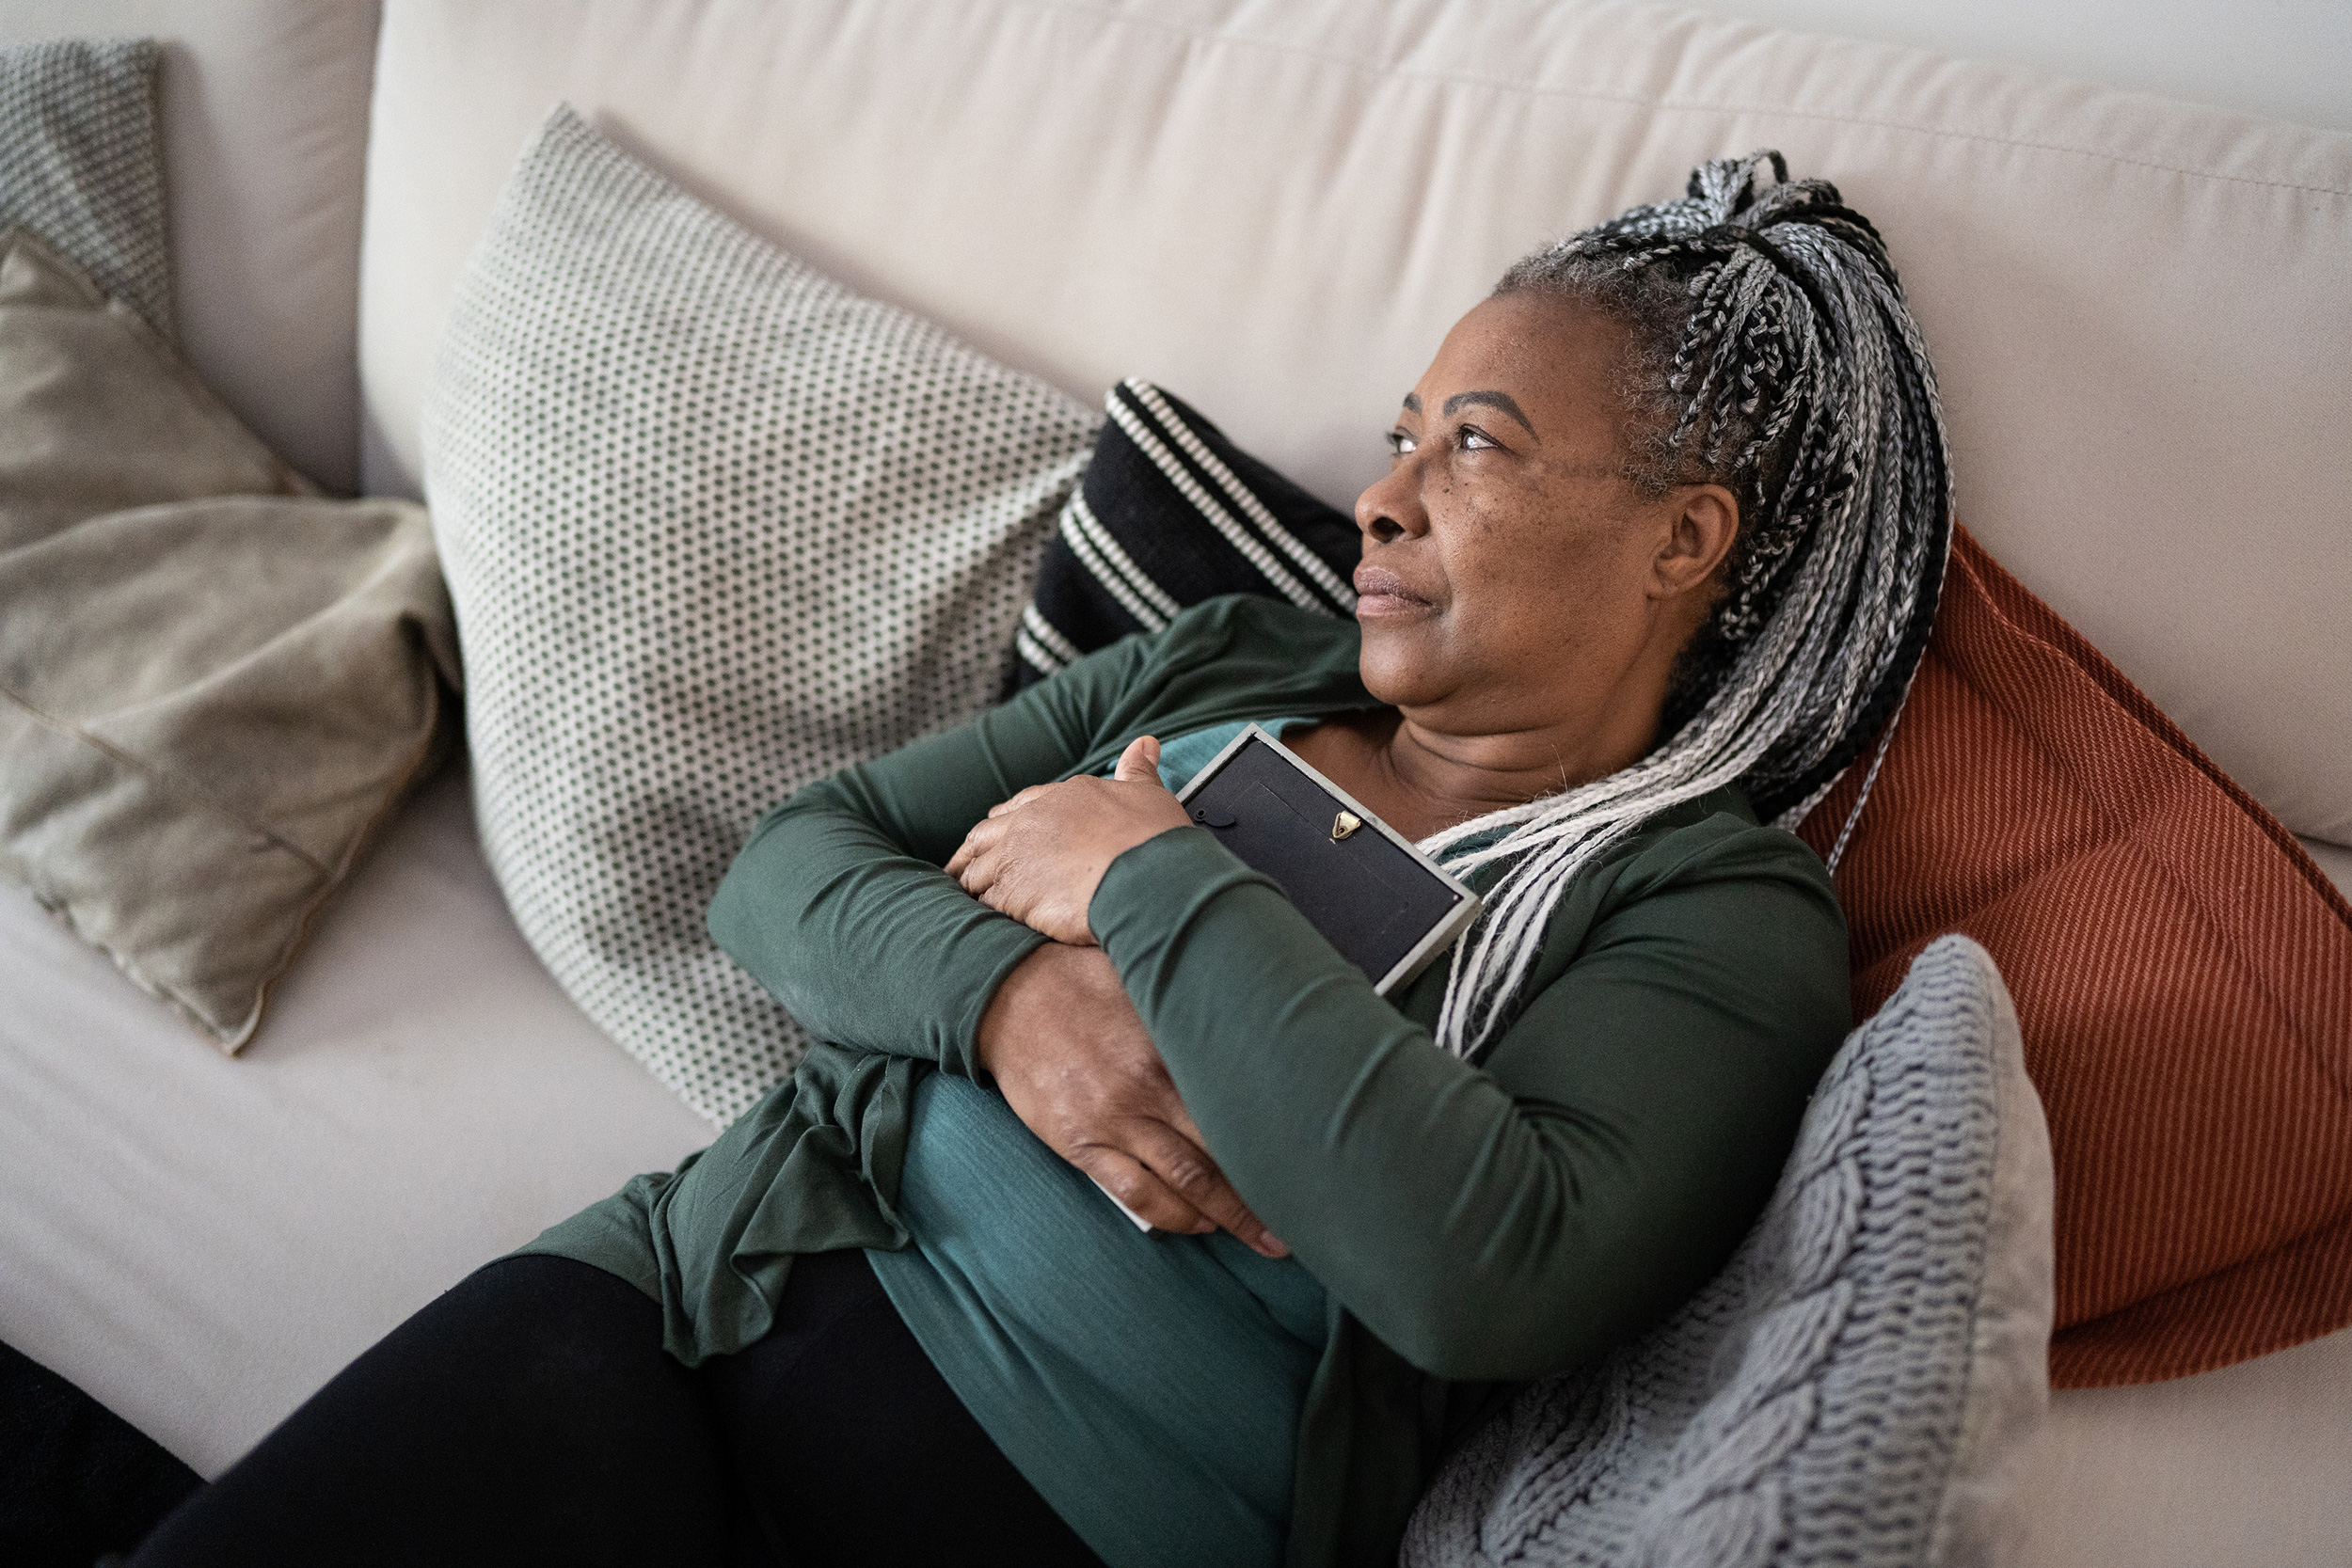 Reclining on her couch, a woman hugs a picture frame. People with certain direct relationships with a deceased Social Security Disability recipient can qualify for survivor benefits.